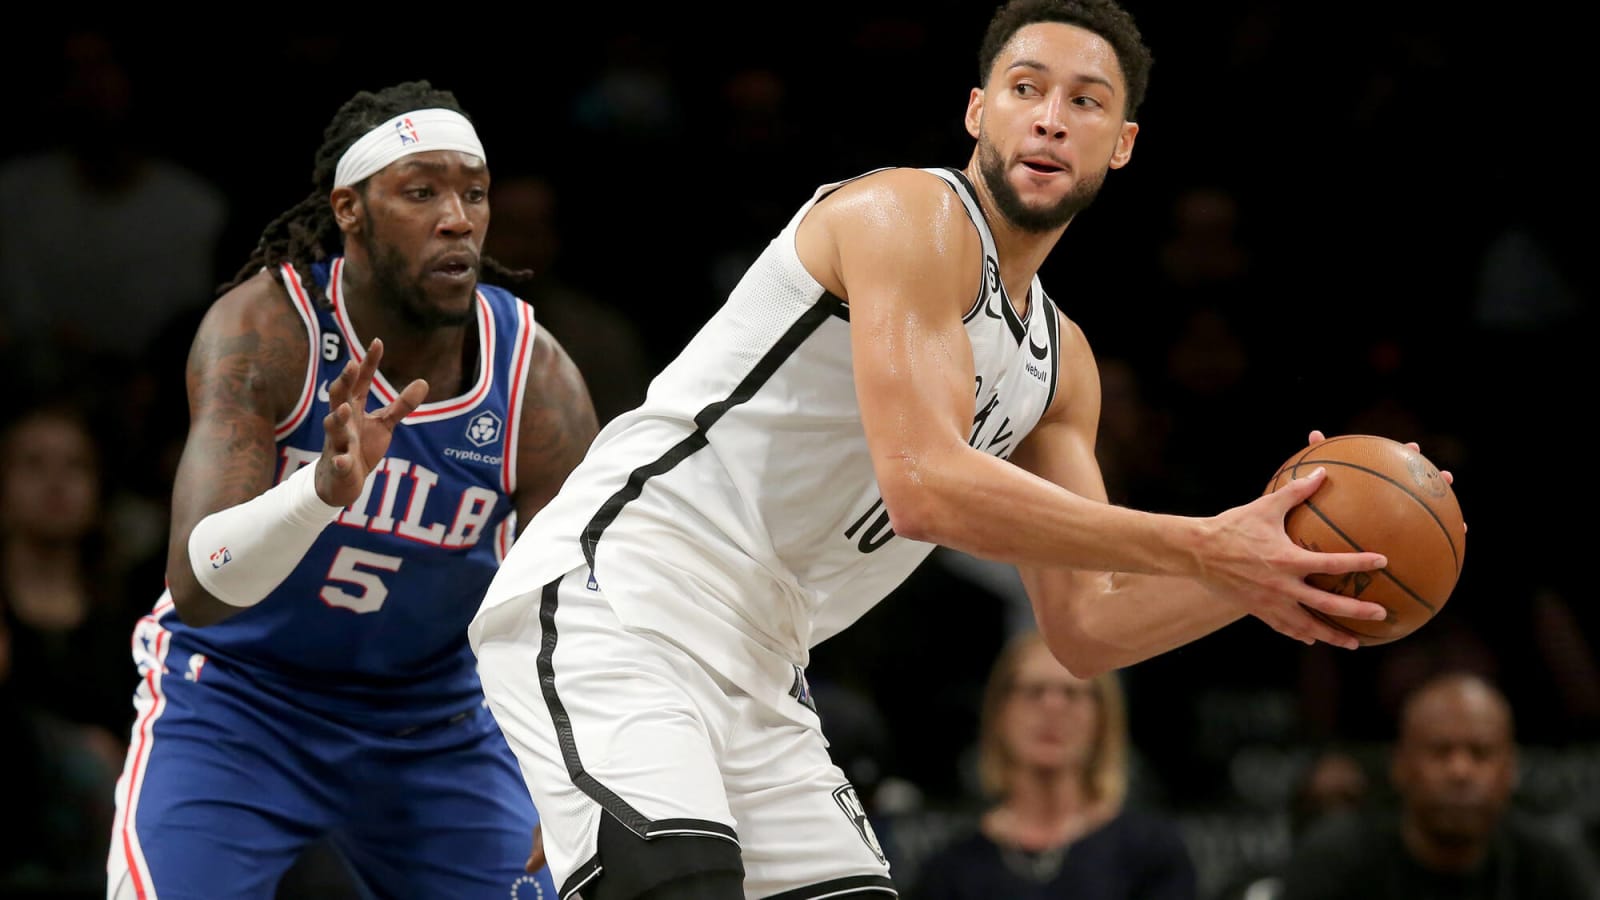 NBA Fans React To Ben Simmons Airballing Midrange Fadeaway Against 76ers:  Summer Workout Videos Tricked Folks Again